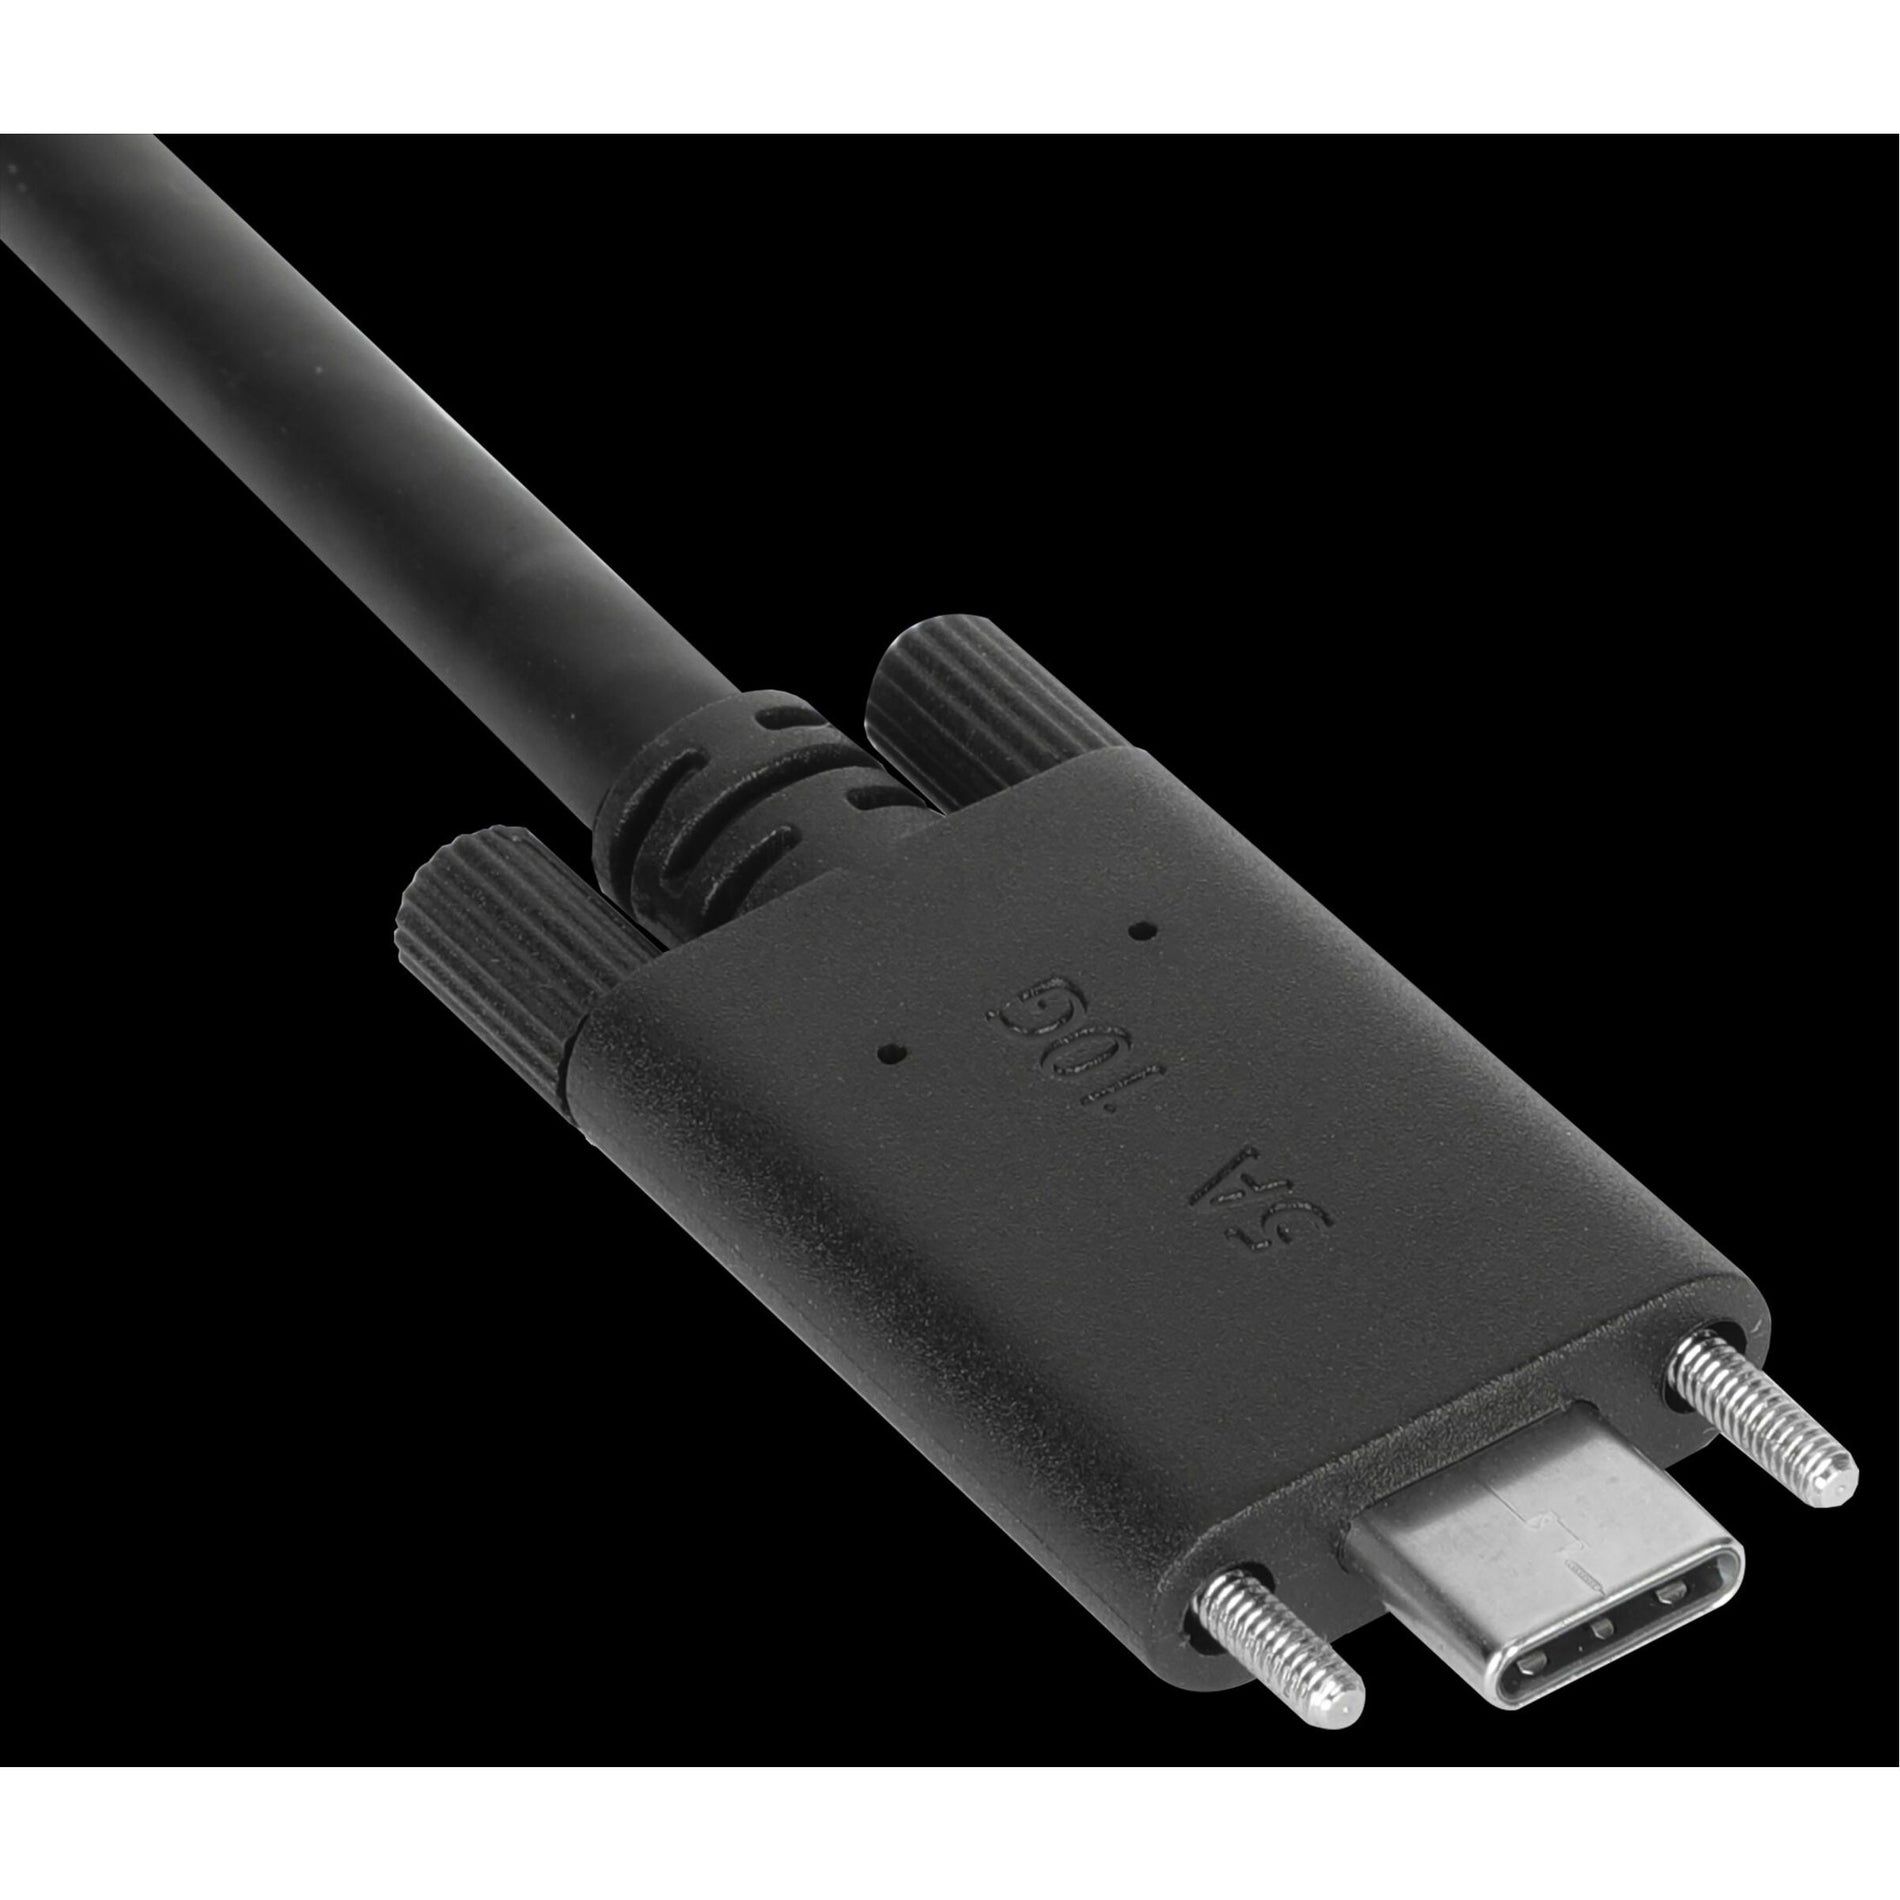 Targus ACC1133GLX 1M USB-C Male with Screw to USB-C Male Cable with USB-A Tether, Data Transfer Cable, 3.28 ft, Black